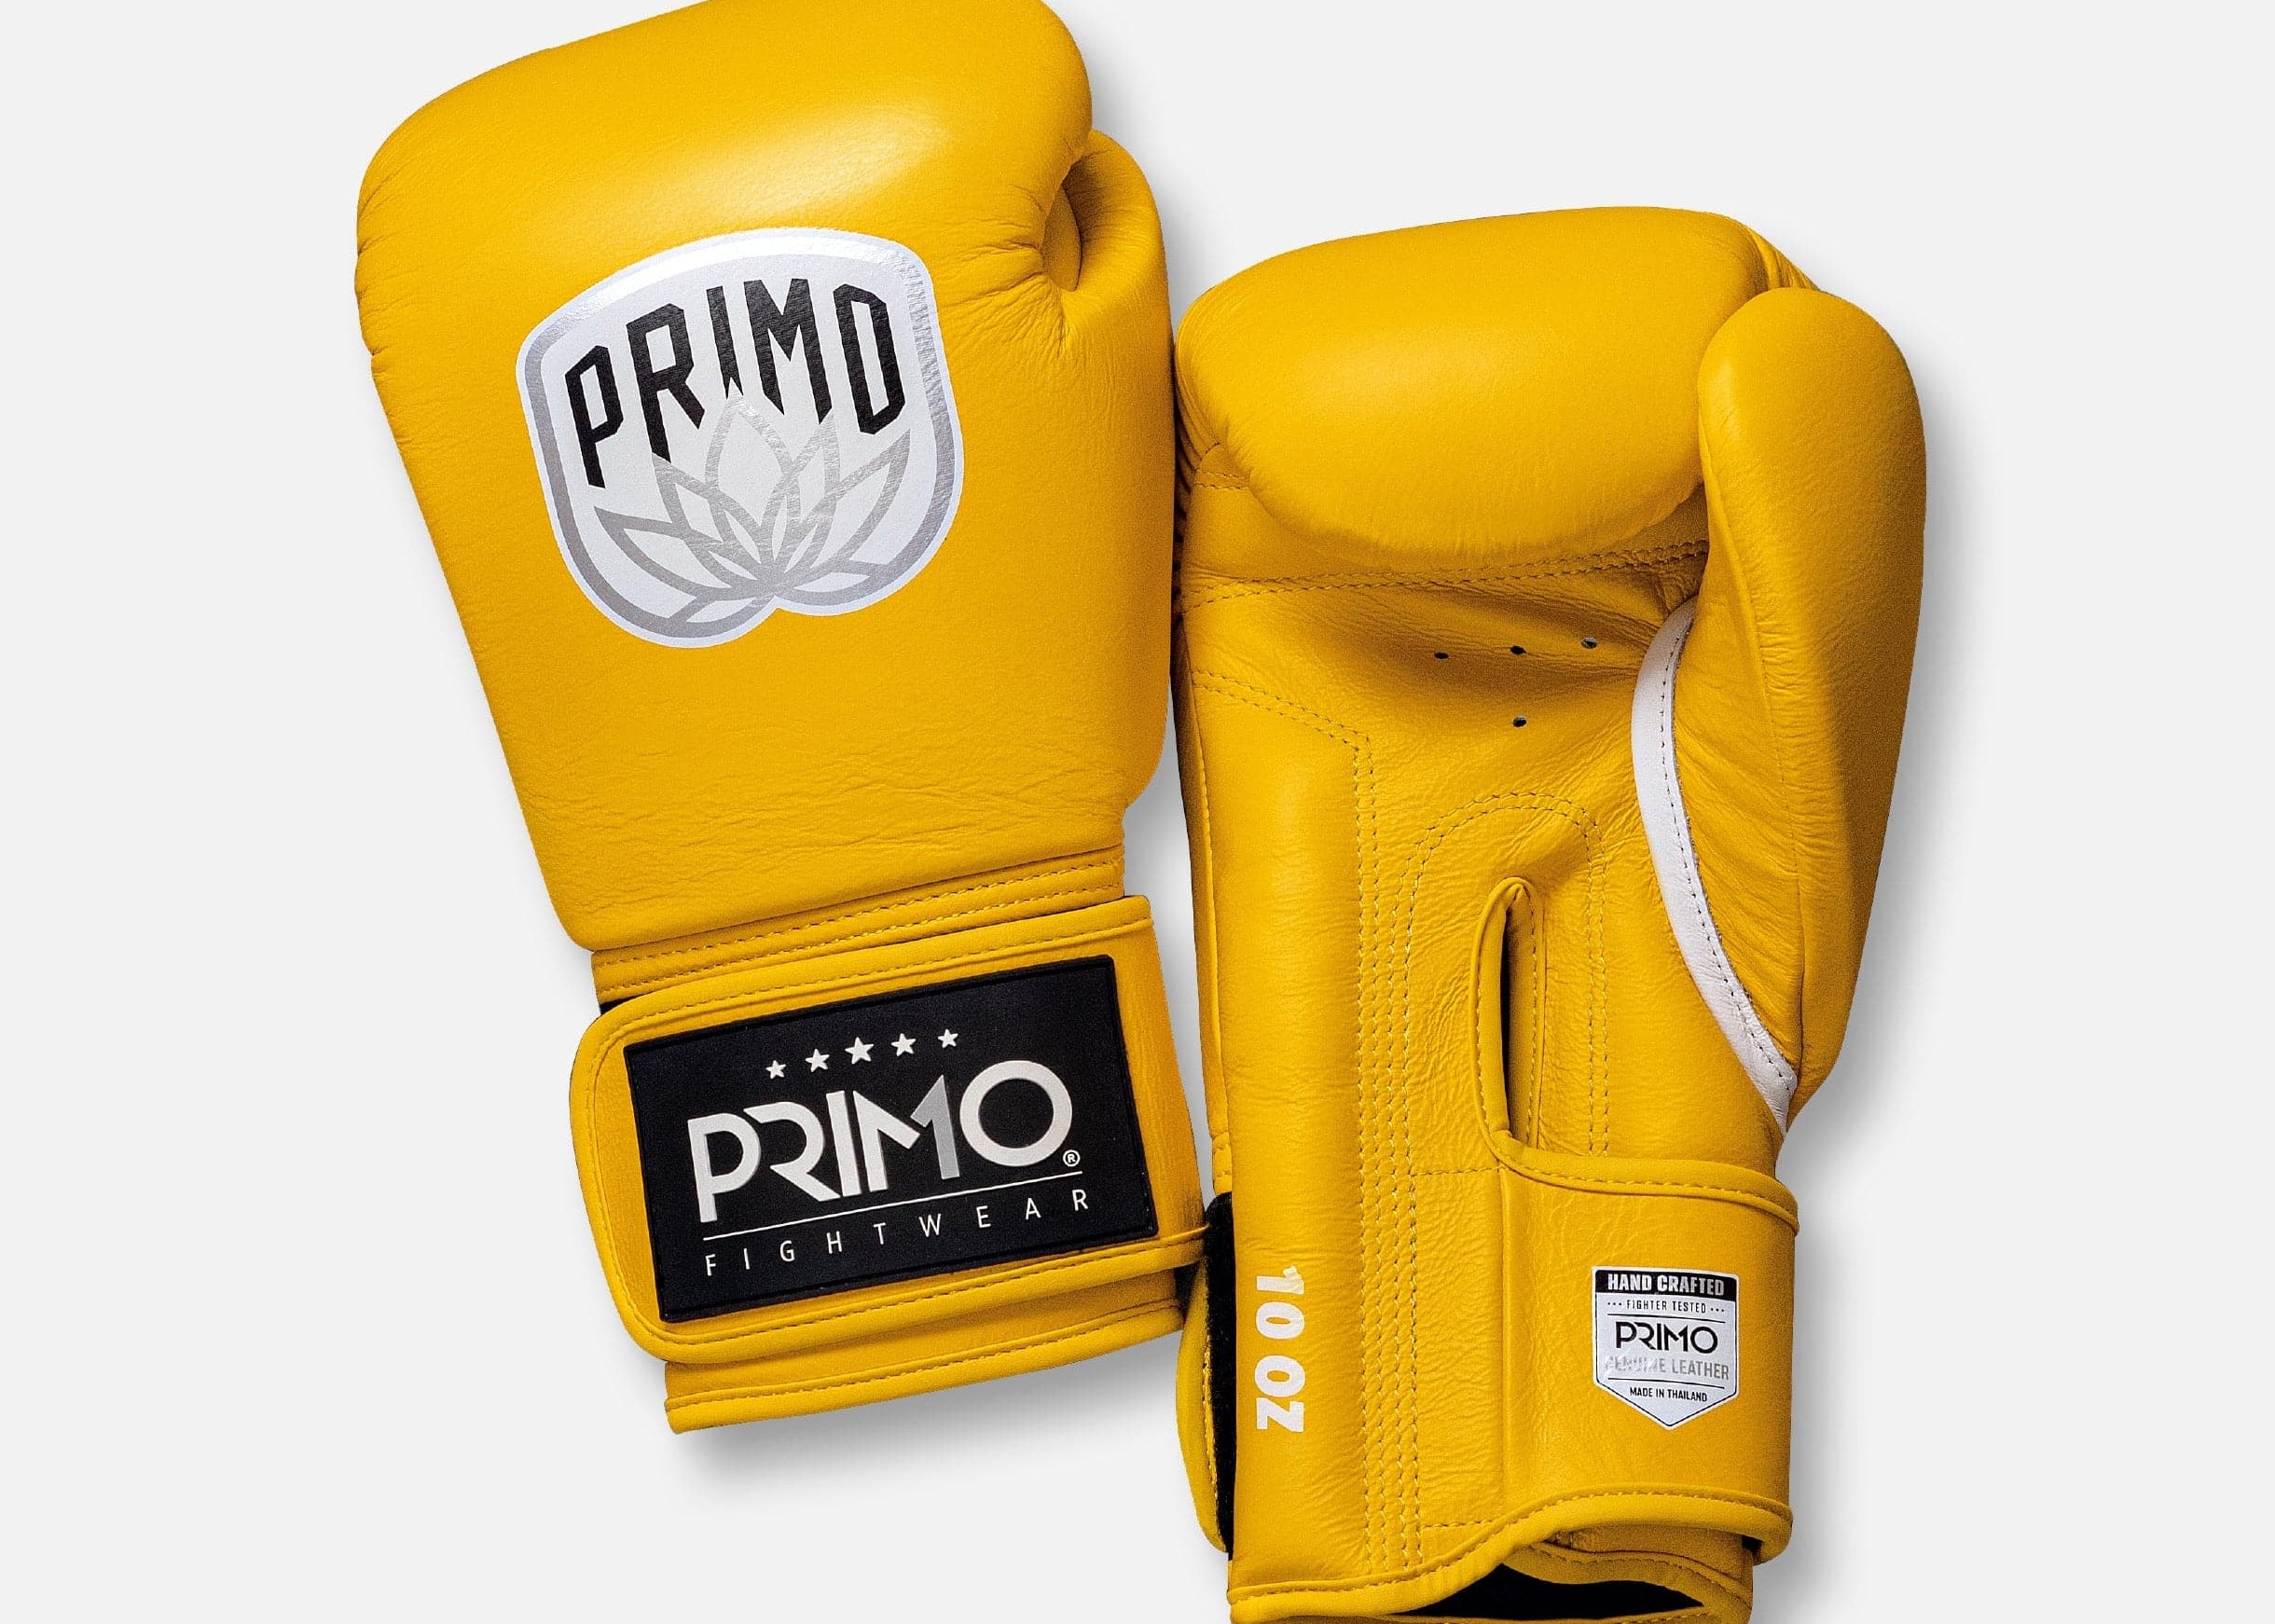 Primo Fight Wear Official Emblem 2.0 Boxing Gloves - Shaolin Yellow